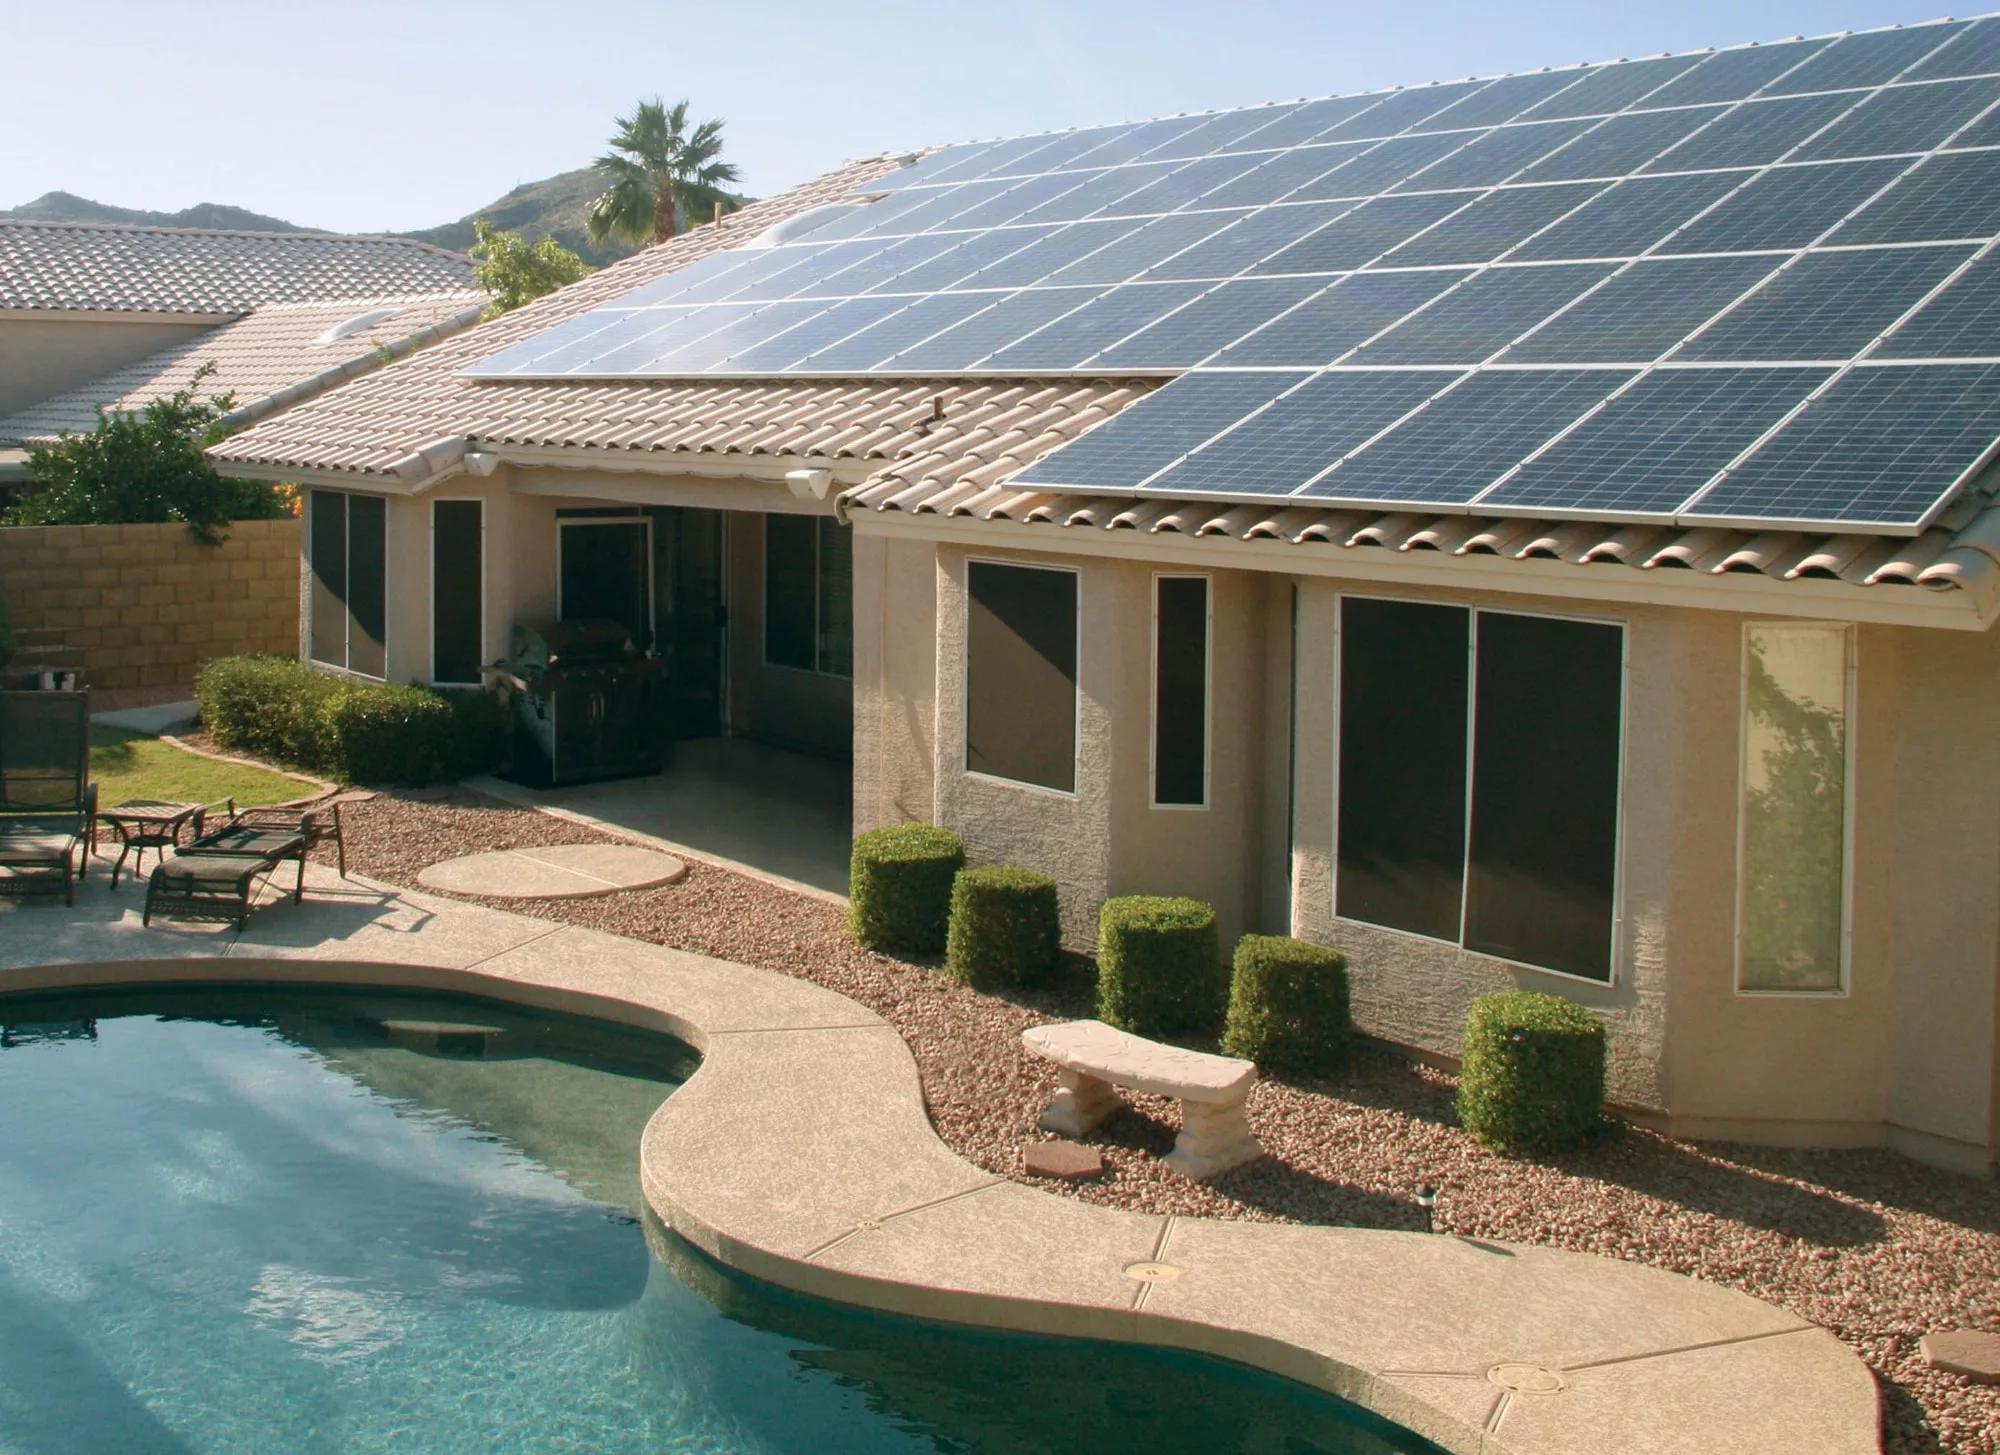 can i have solar panels in florida - Can a homeowner install solar panels in Florida